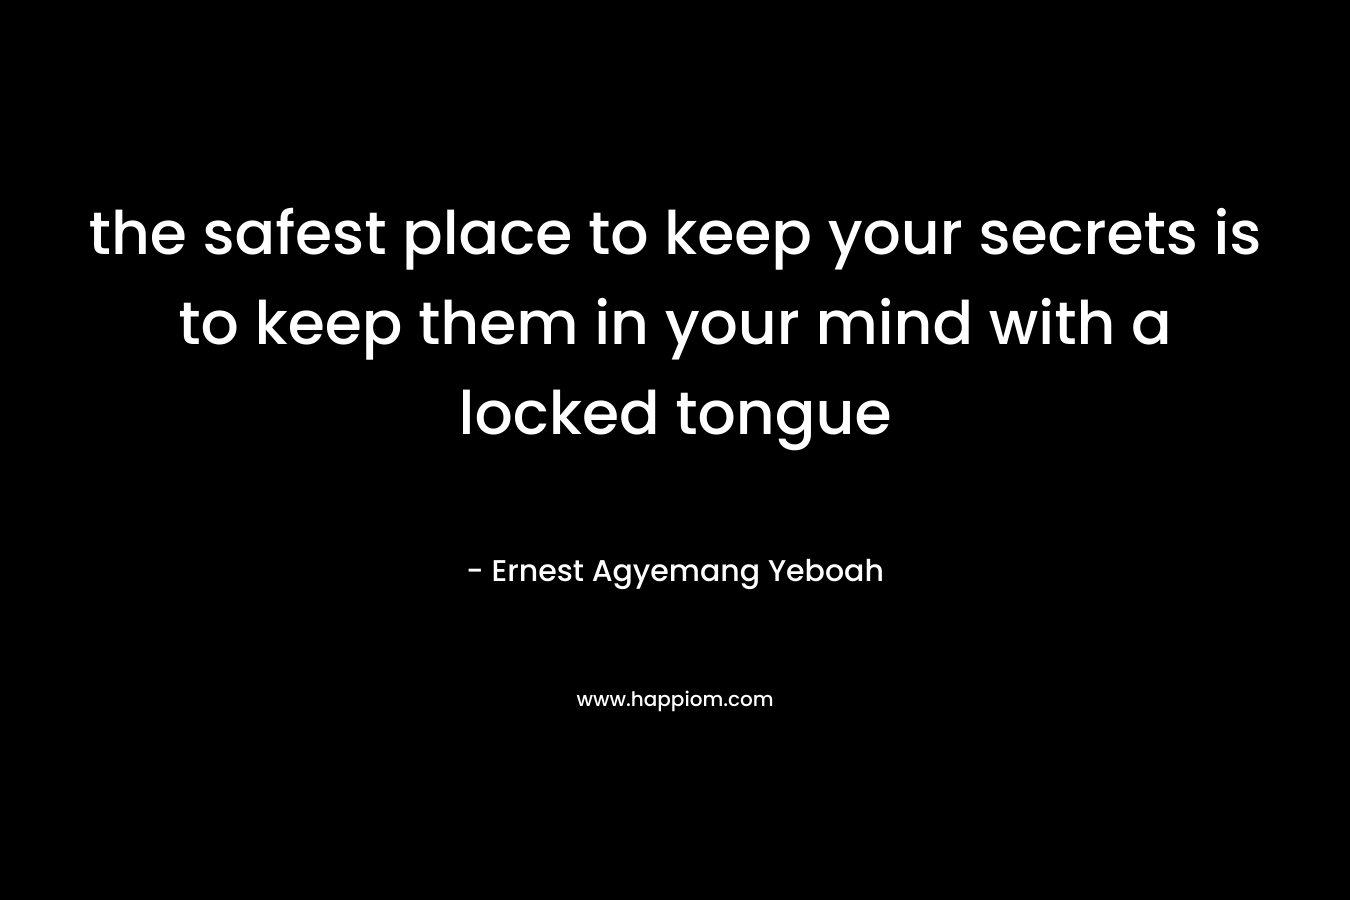 the safest place to keep your secrets is to keep them in your mind with a locked tongue – Ernest Agyemang Yeboah